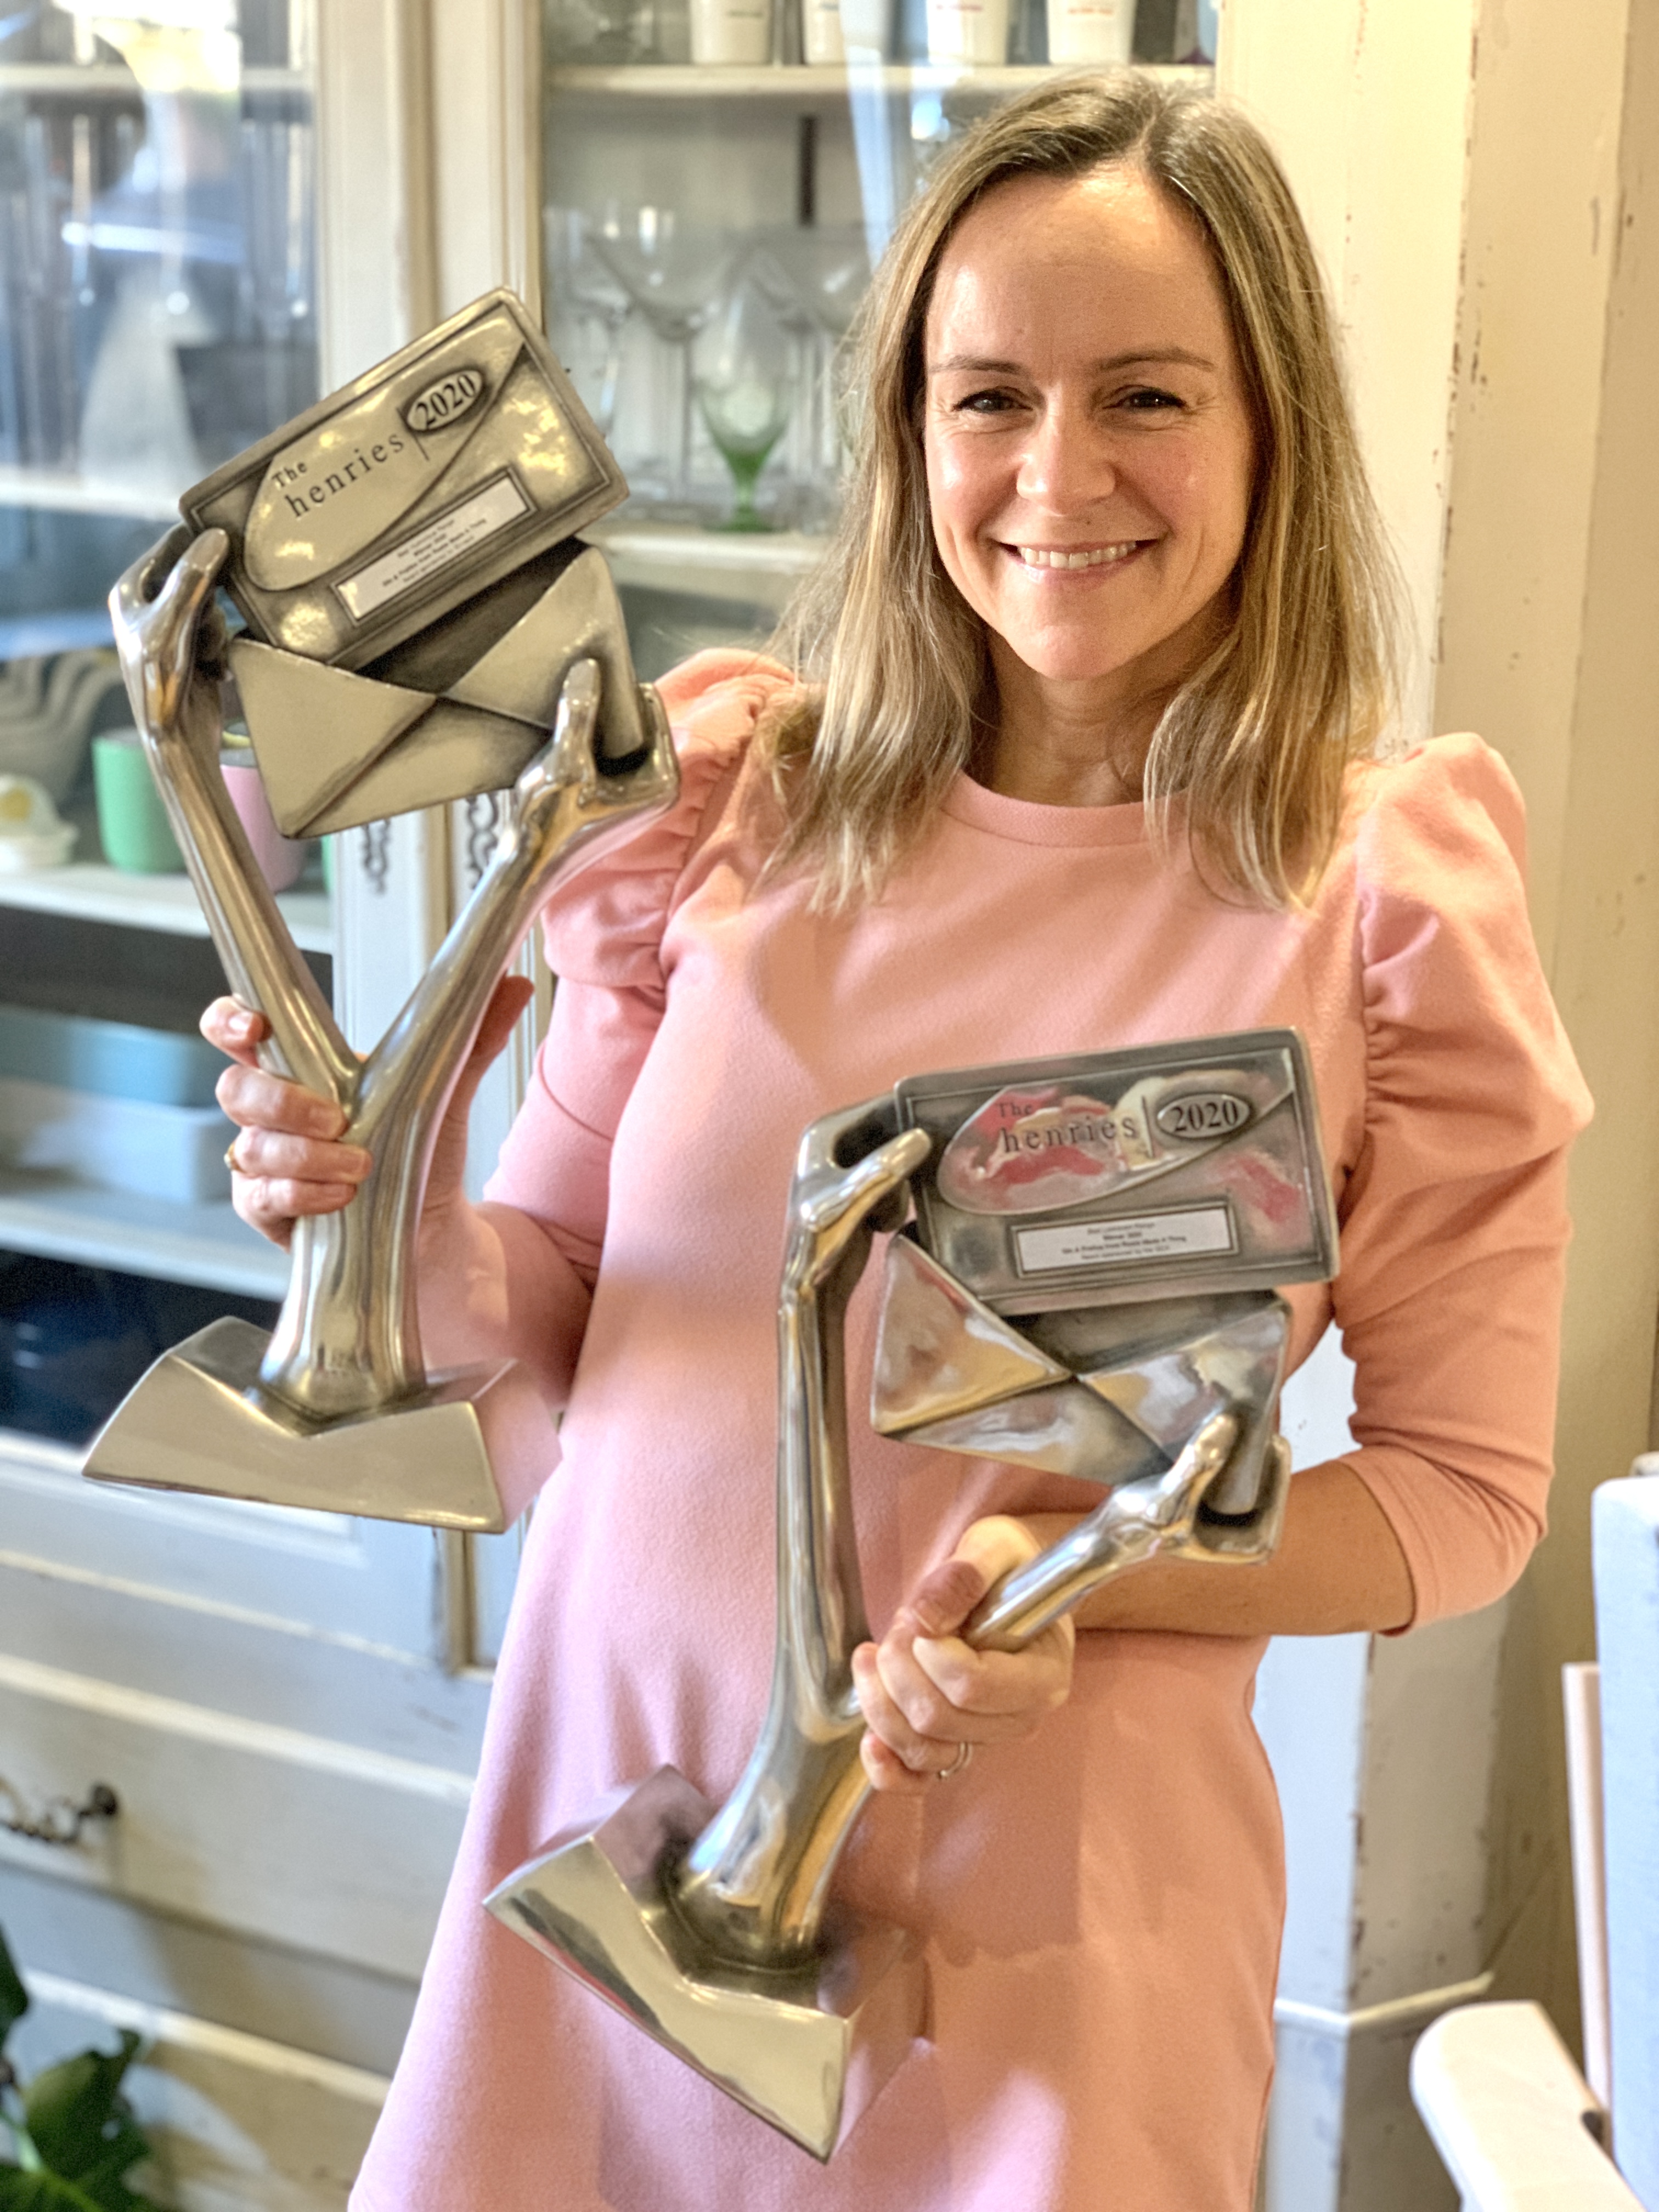 Above: Rosie Harrison, founder of Rosie Made a Thing with her two trophies